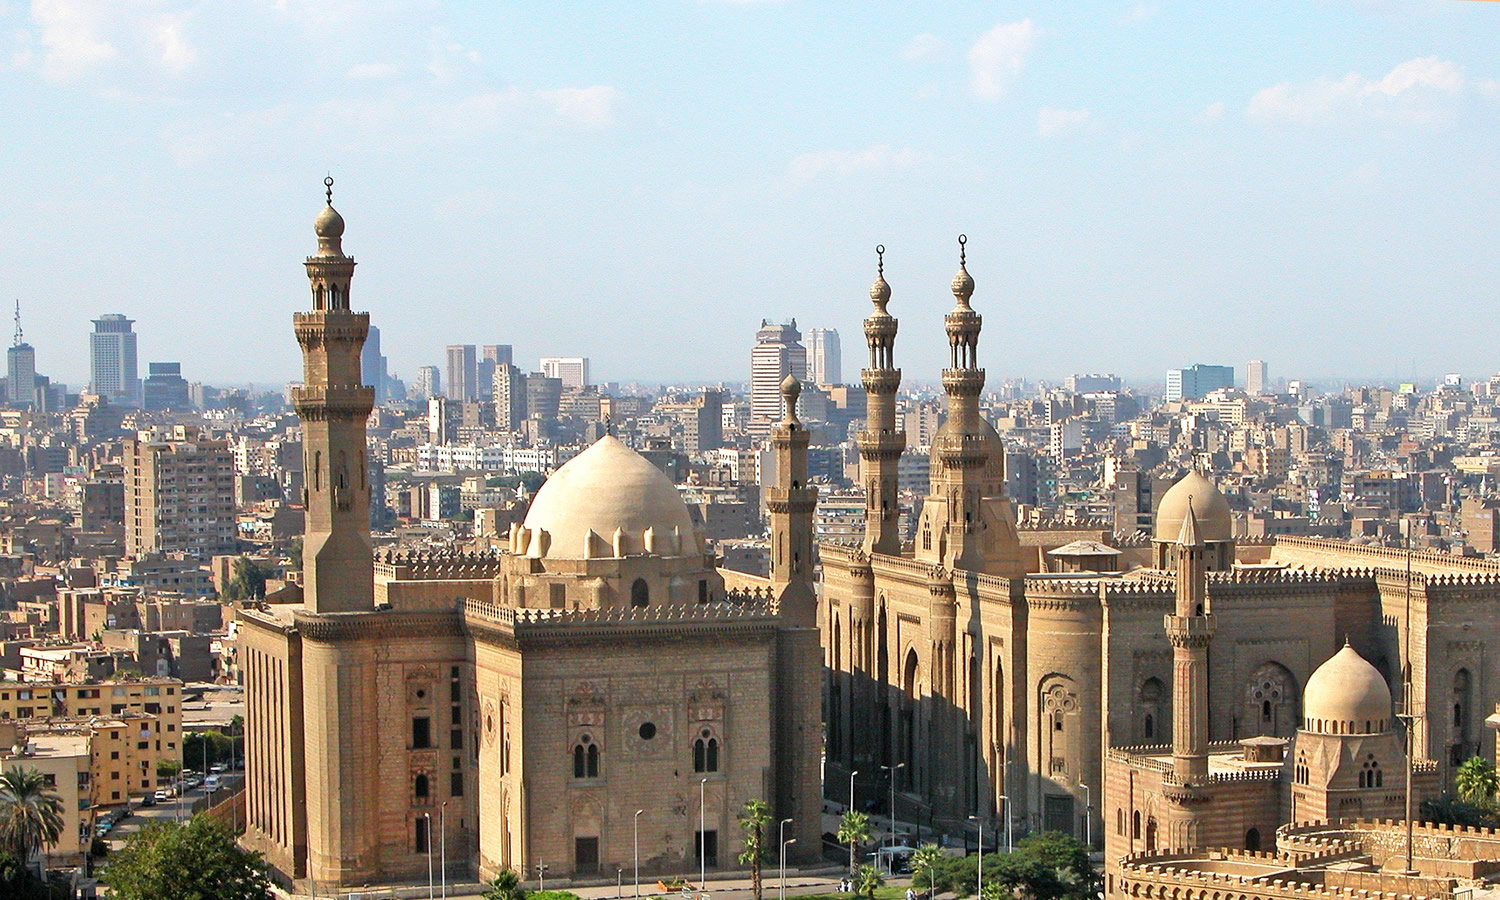 Nile Cruises, Boat Trips, Sightseeing: 3 Days Cairo individual Tour